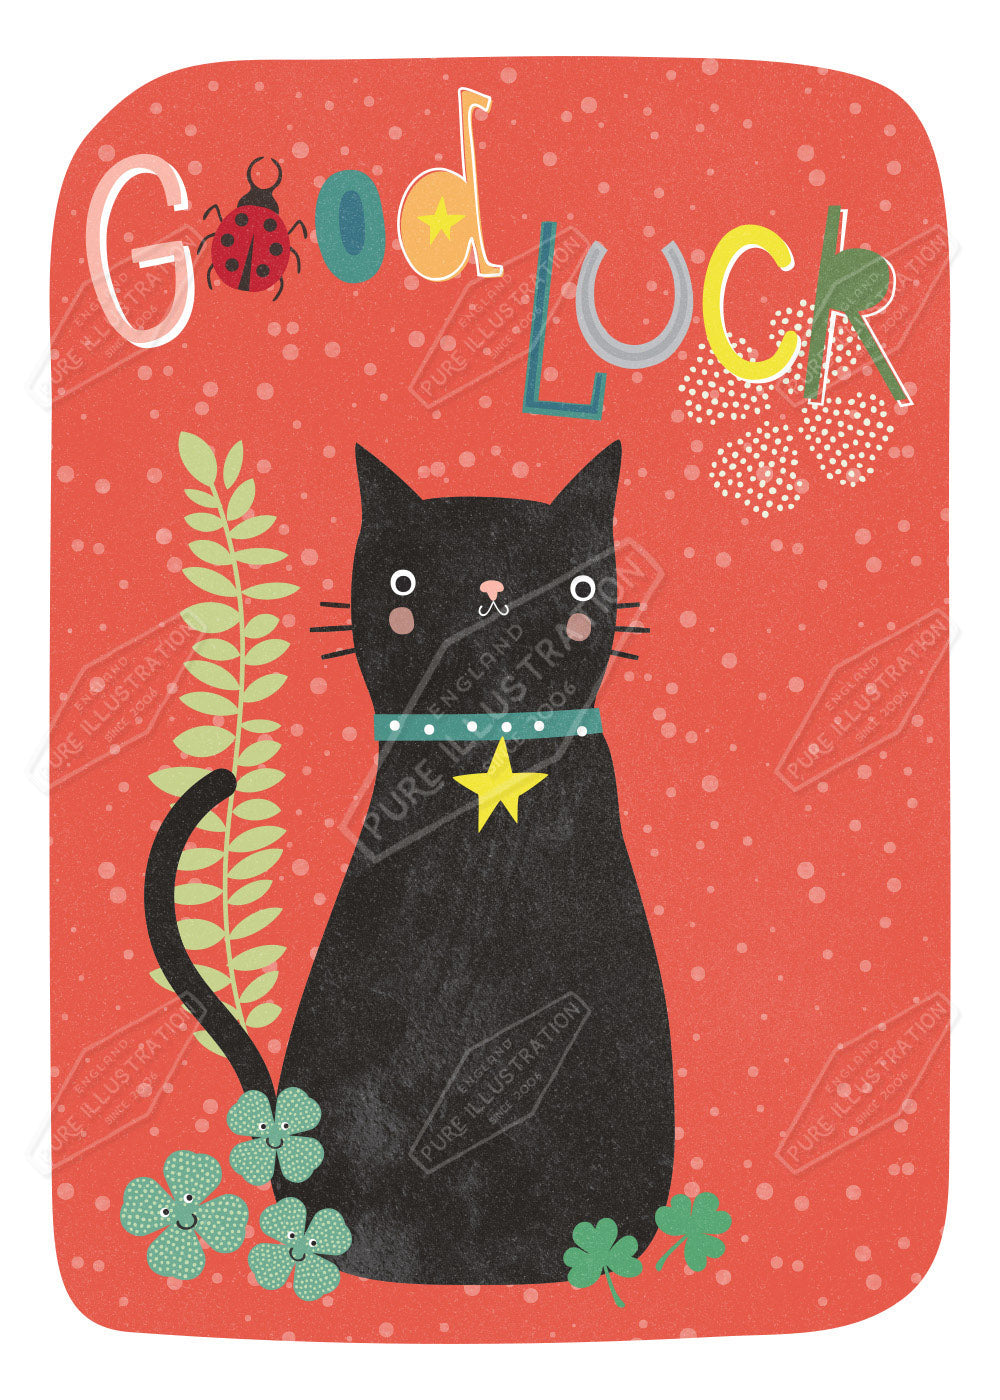 Good Luck Cat Design by Gill Eggleston for Pure Art Licensing Agency & Surface Design Studio